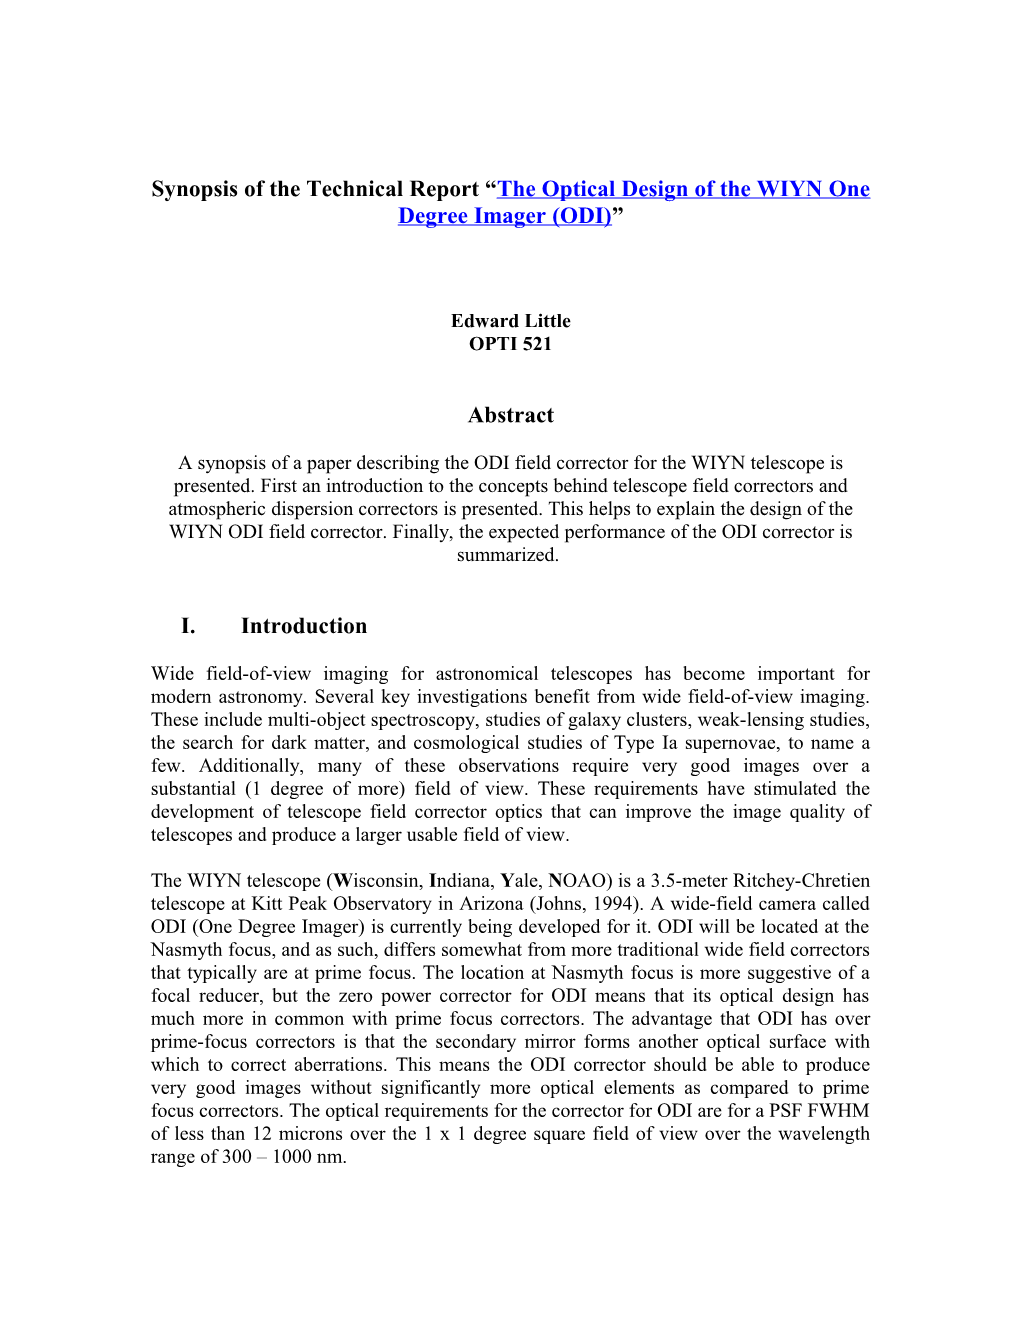 Synopsis of the Technical Report the Optical Design of the WIYN One Degree Imager (ODI)